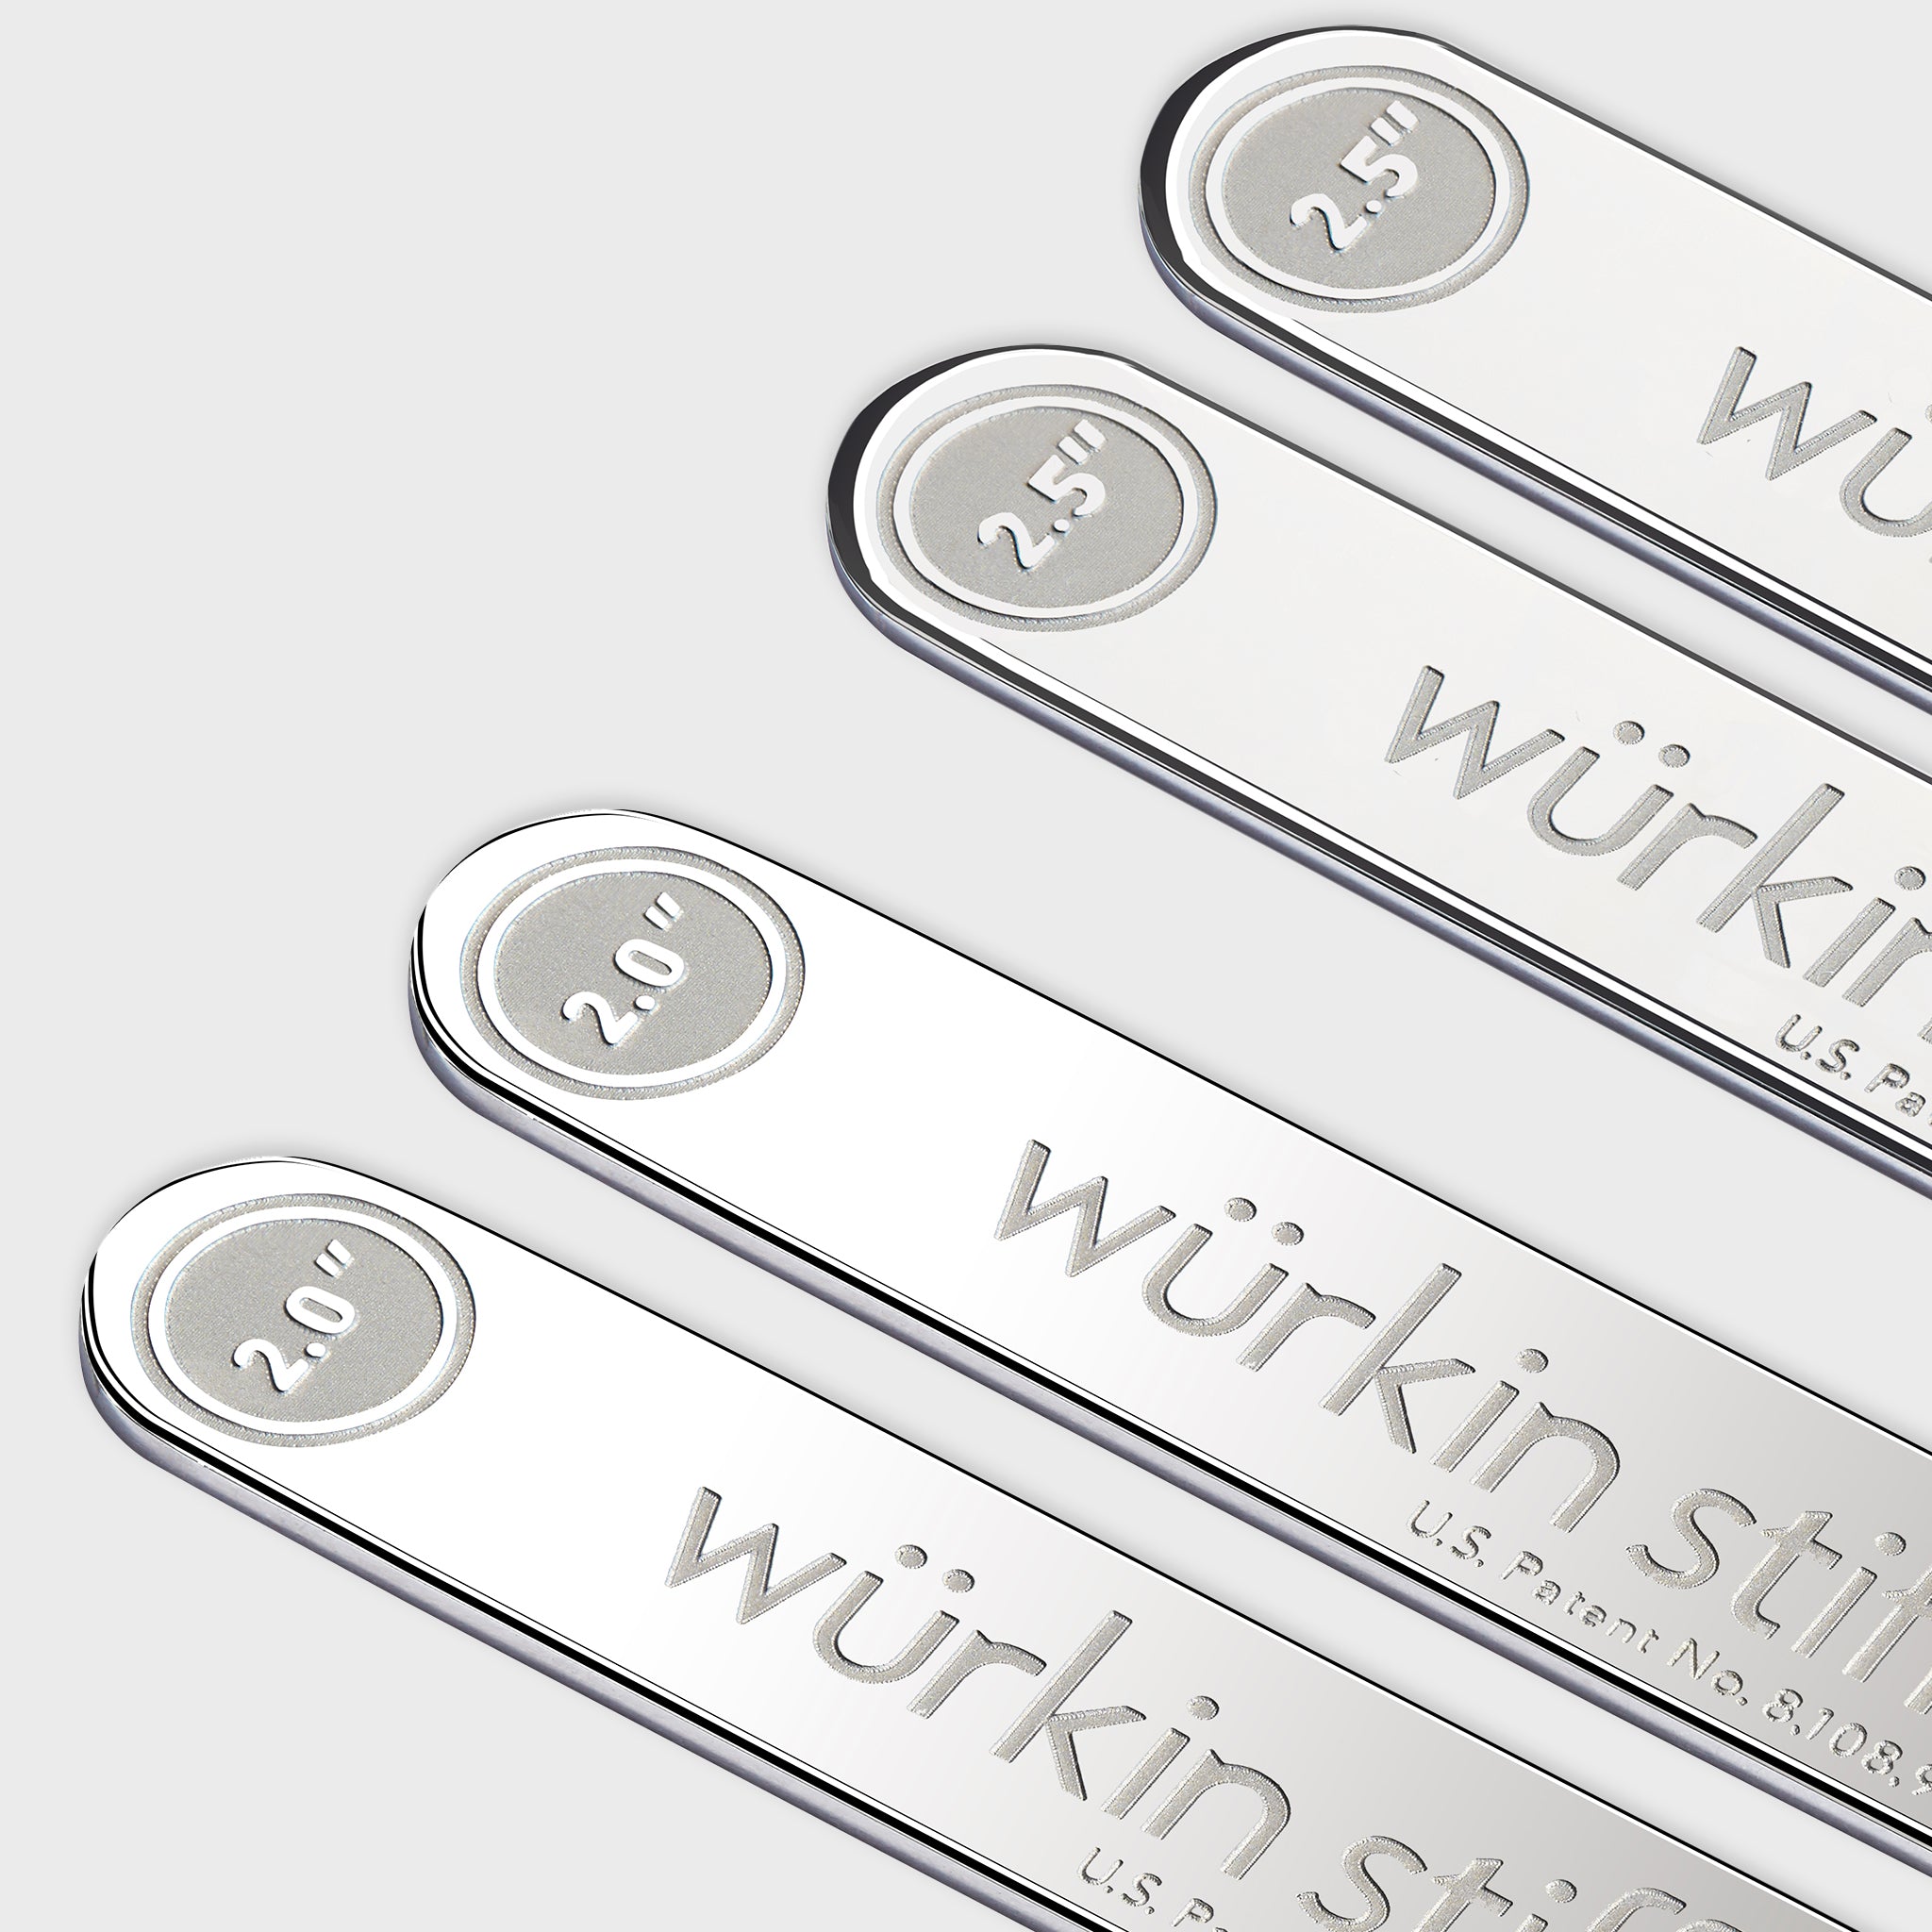  Stick-N-Stays Magnetic Collar Stays by Würkin Stiffs, Includes  (10) Magnetic Adhesive Polo Stays and (2) Power Button Magnets, Gift for  Men